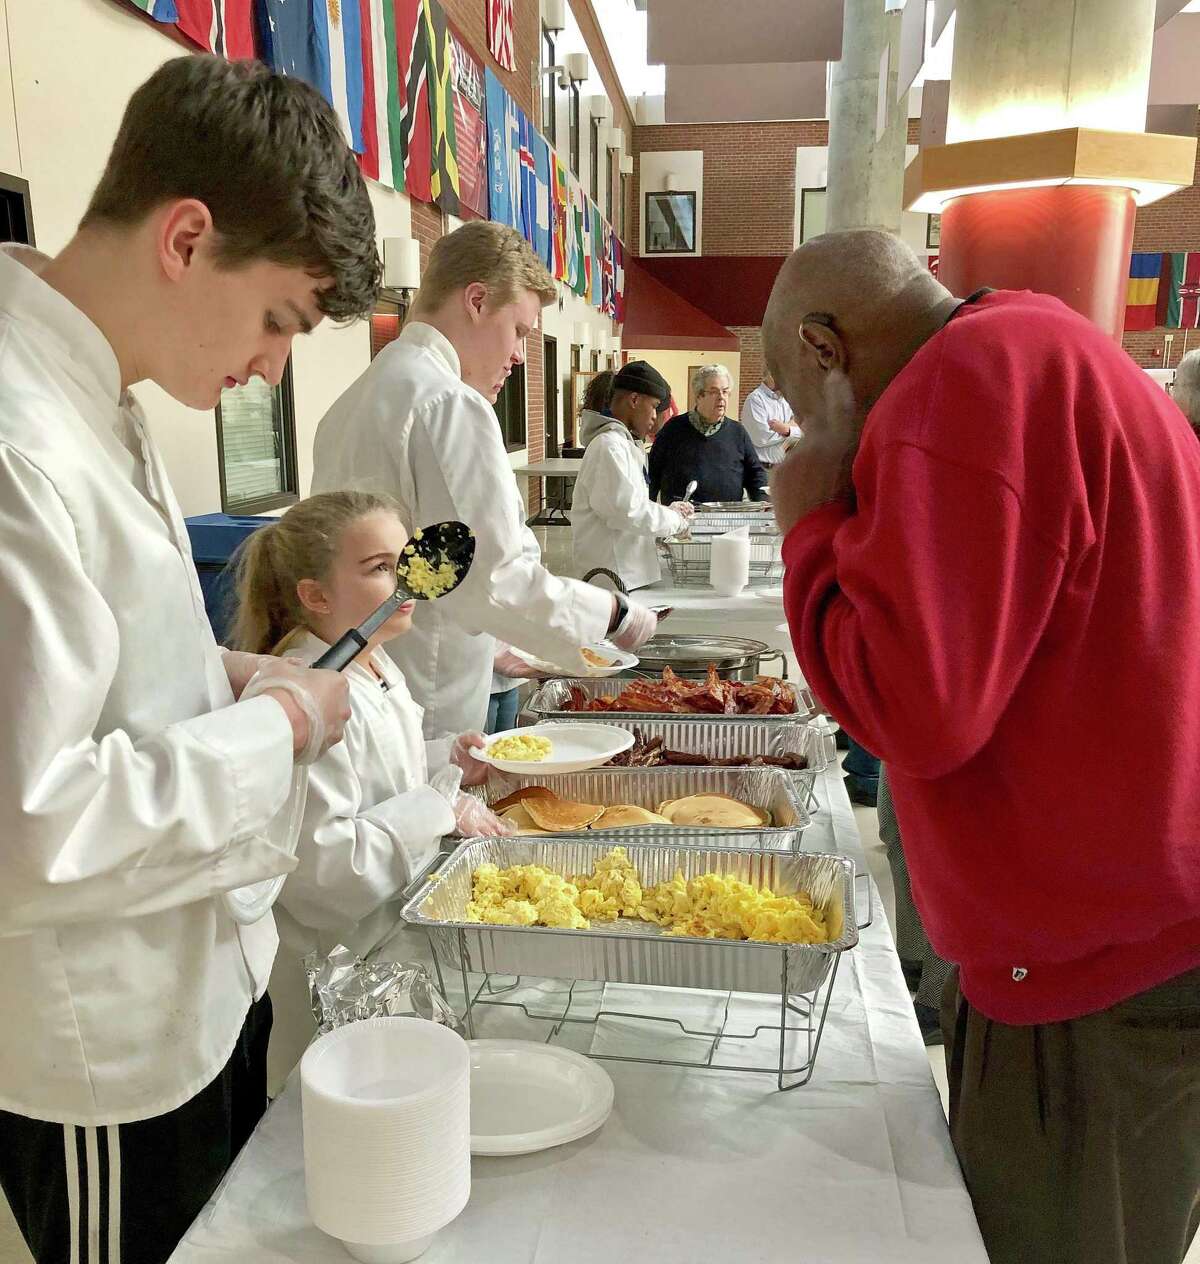 Paige Baker of Walsh Intermediate School serves pancakes to former Branford police chief Robert Gill at the annual Martin Luther King Jr. Day breakfast held, for the first time, at Branford High School on Jan. 21. In inspiring remarks, guest speaker Beth Chandler asked the roughly 225 breakfast-goers to consider “building a connection this year with at least one person who’s different from you.” Branford High School students Jack Brown and Jason Johnson are also pictured.